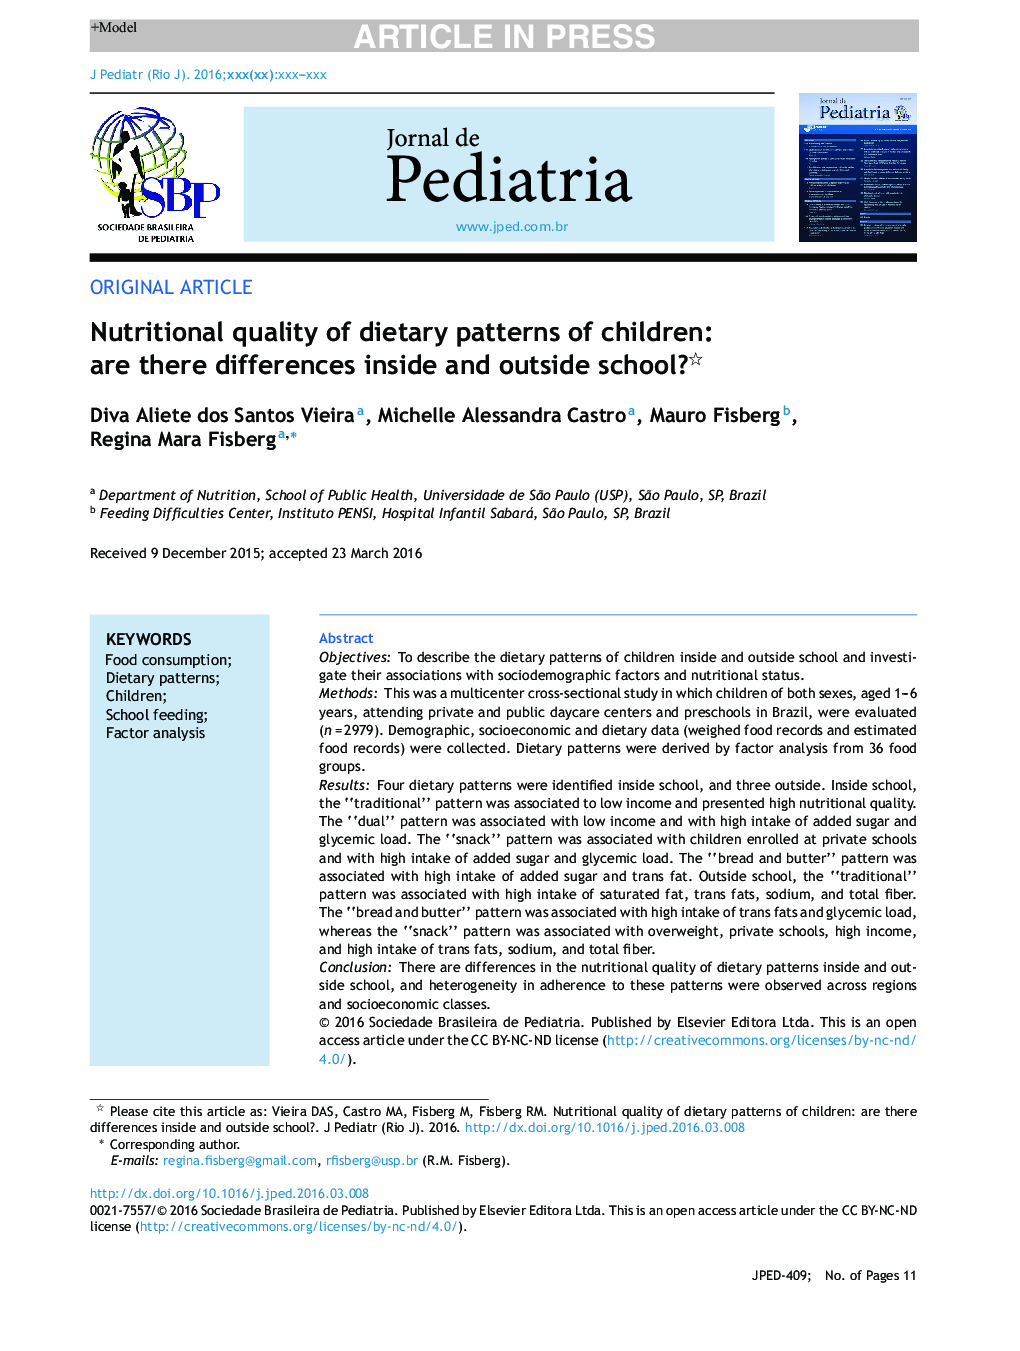 Nutritional quality of dietary patterns of children: are there differences inside and outside school?